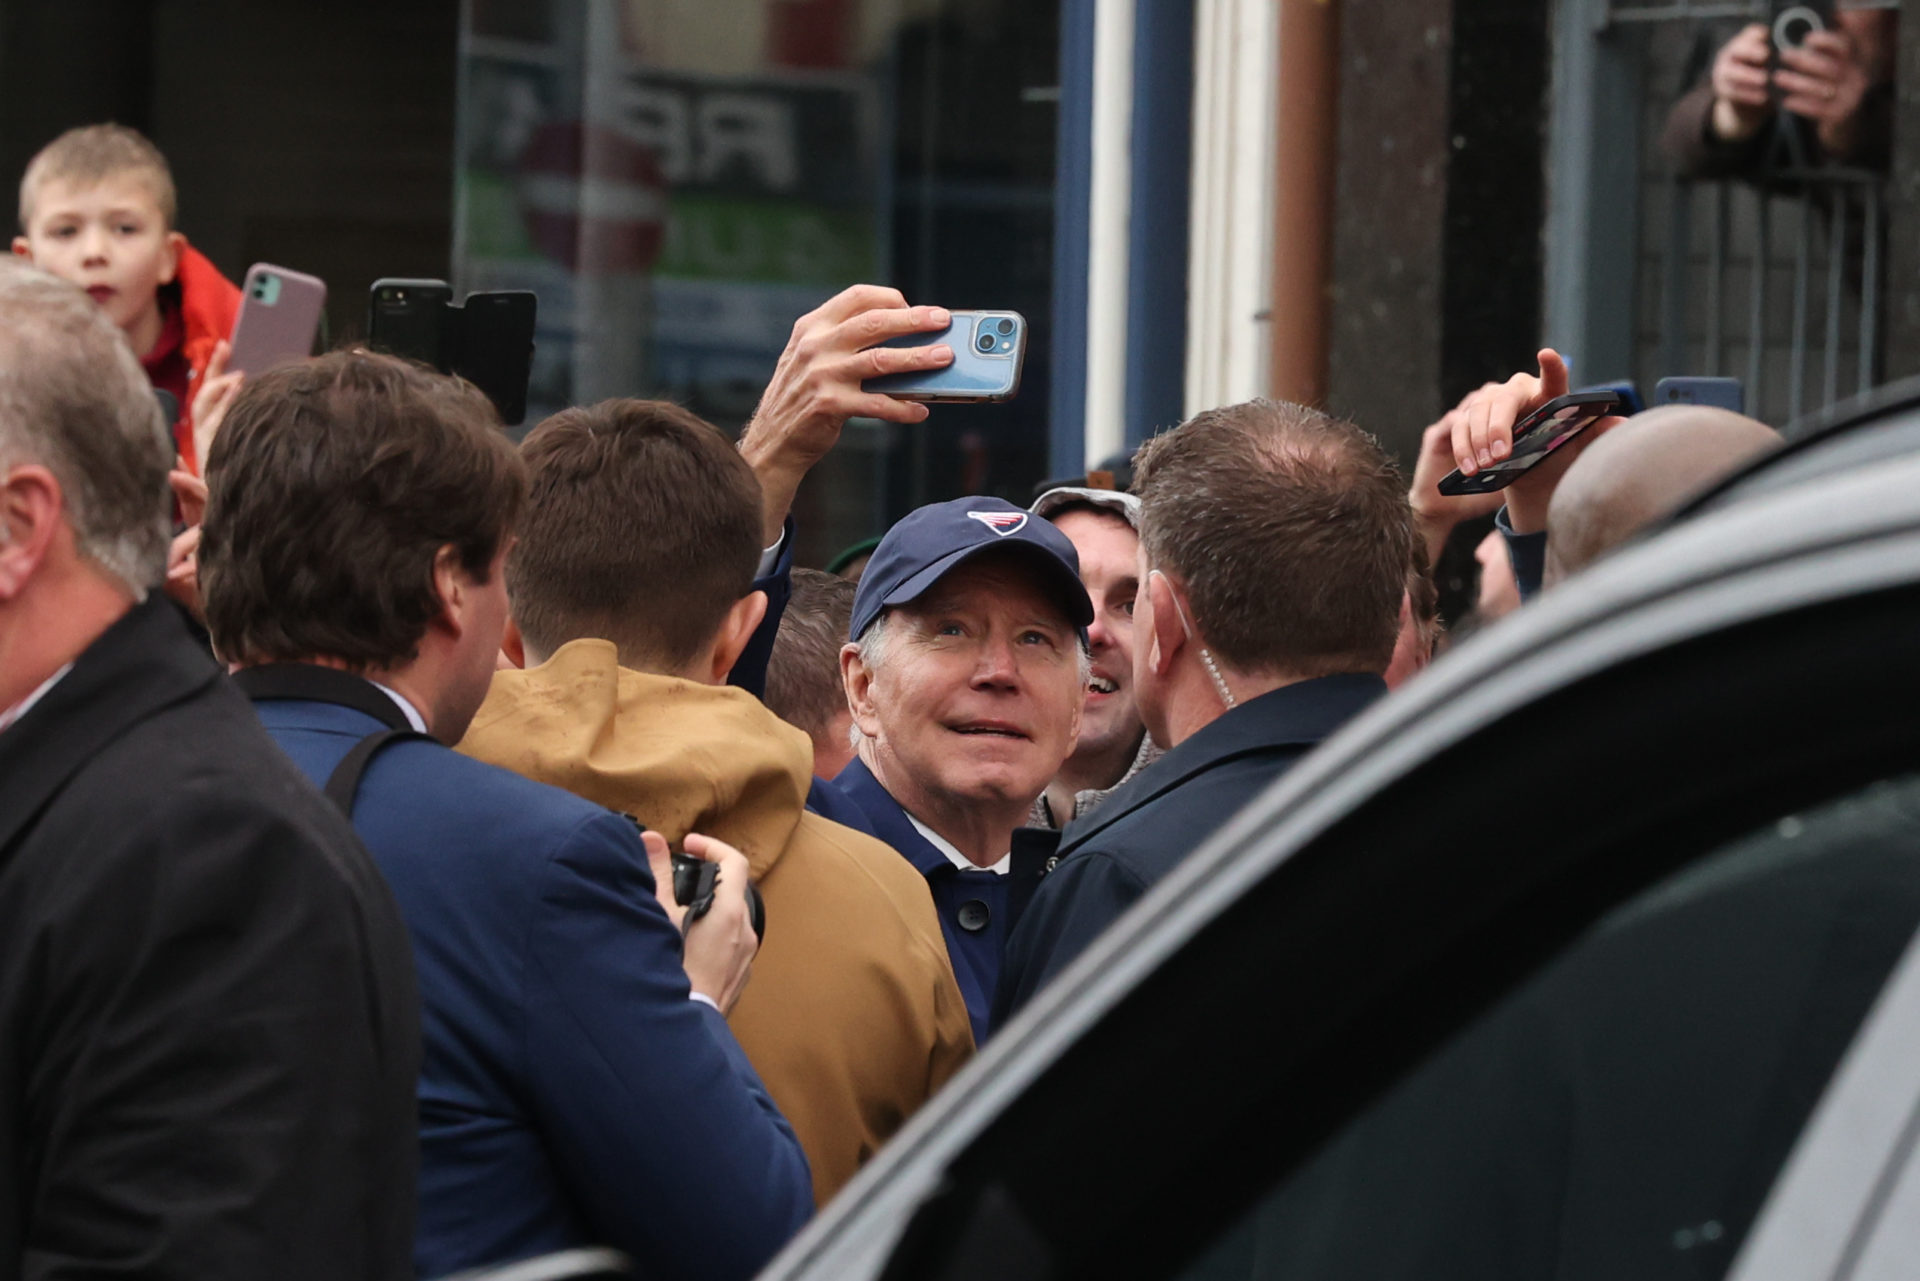 President of the United States Joe Biden getting selfies while visiting Dundalk in Co Louth